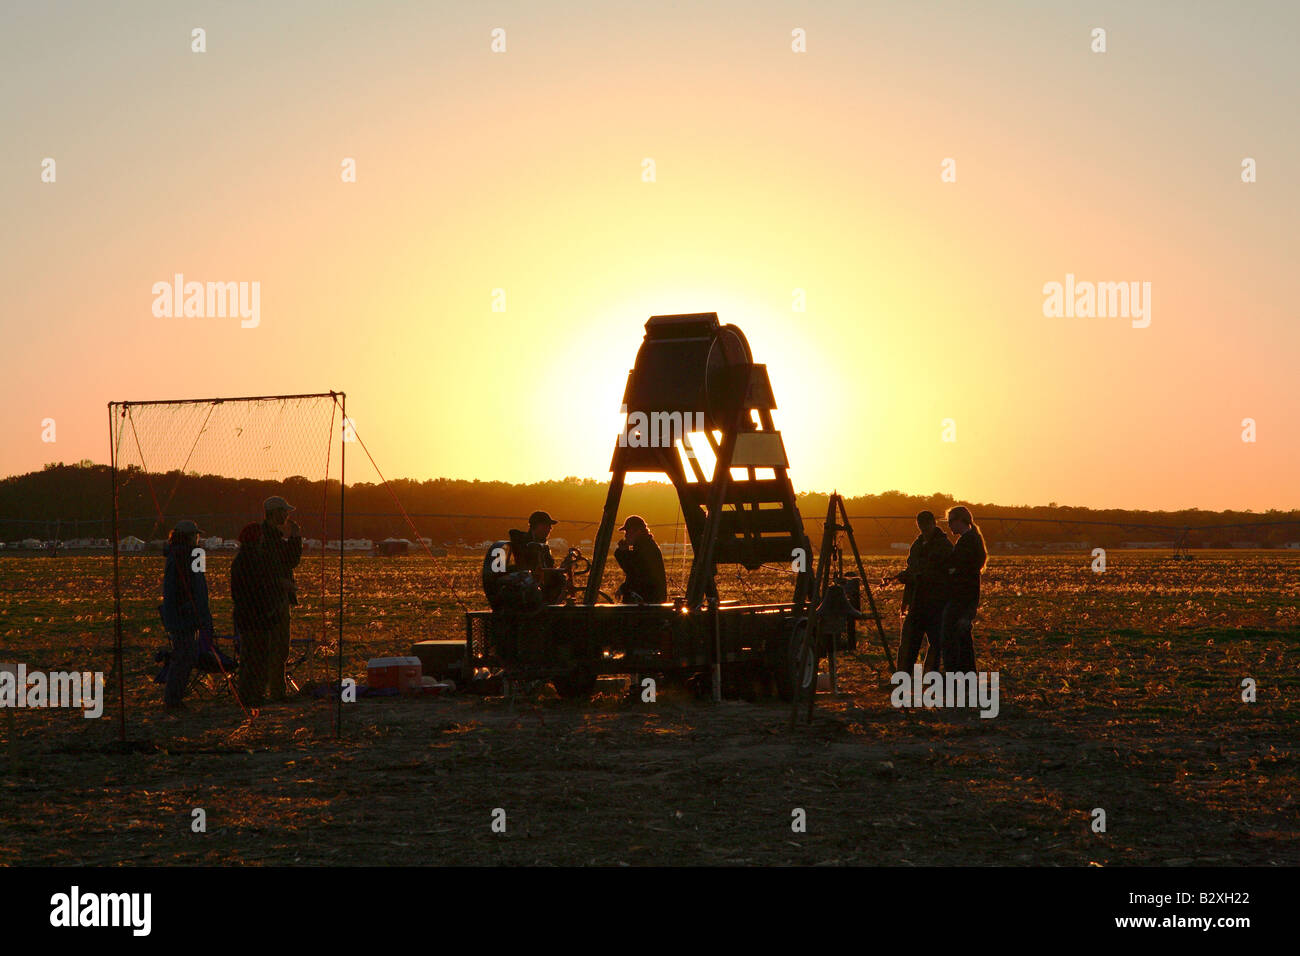 Wooden barrel shaped human powered pumpkin flinging machine with glow of setting sun directly behind Stock Photo